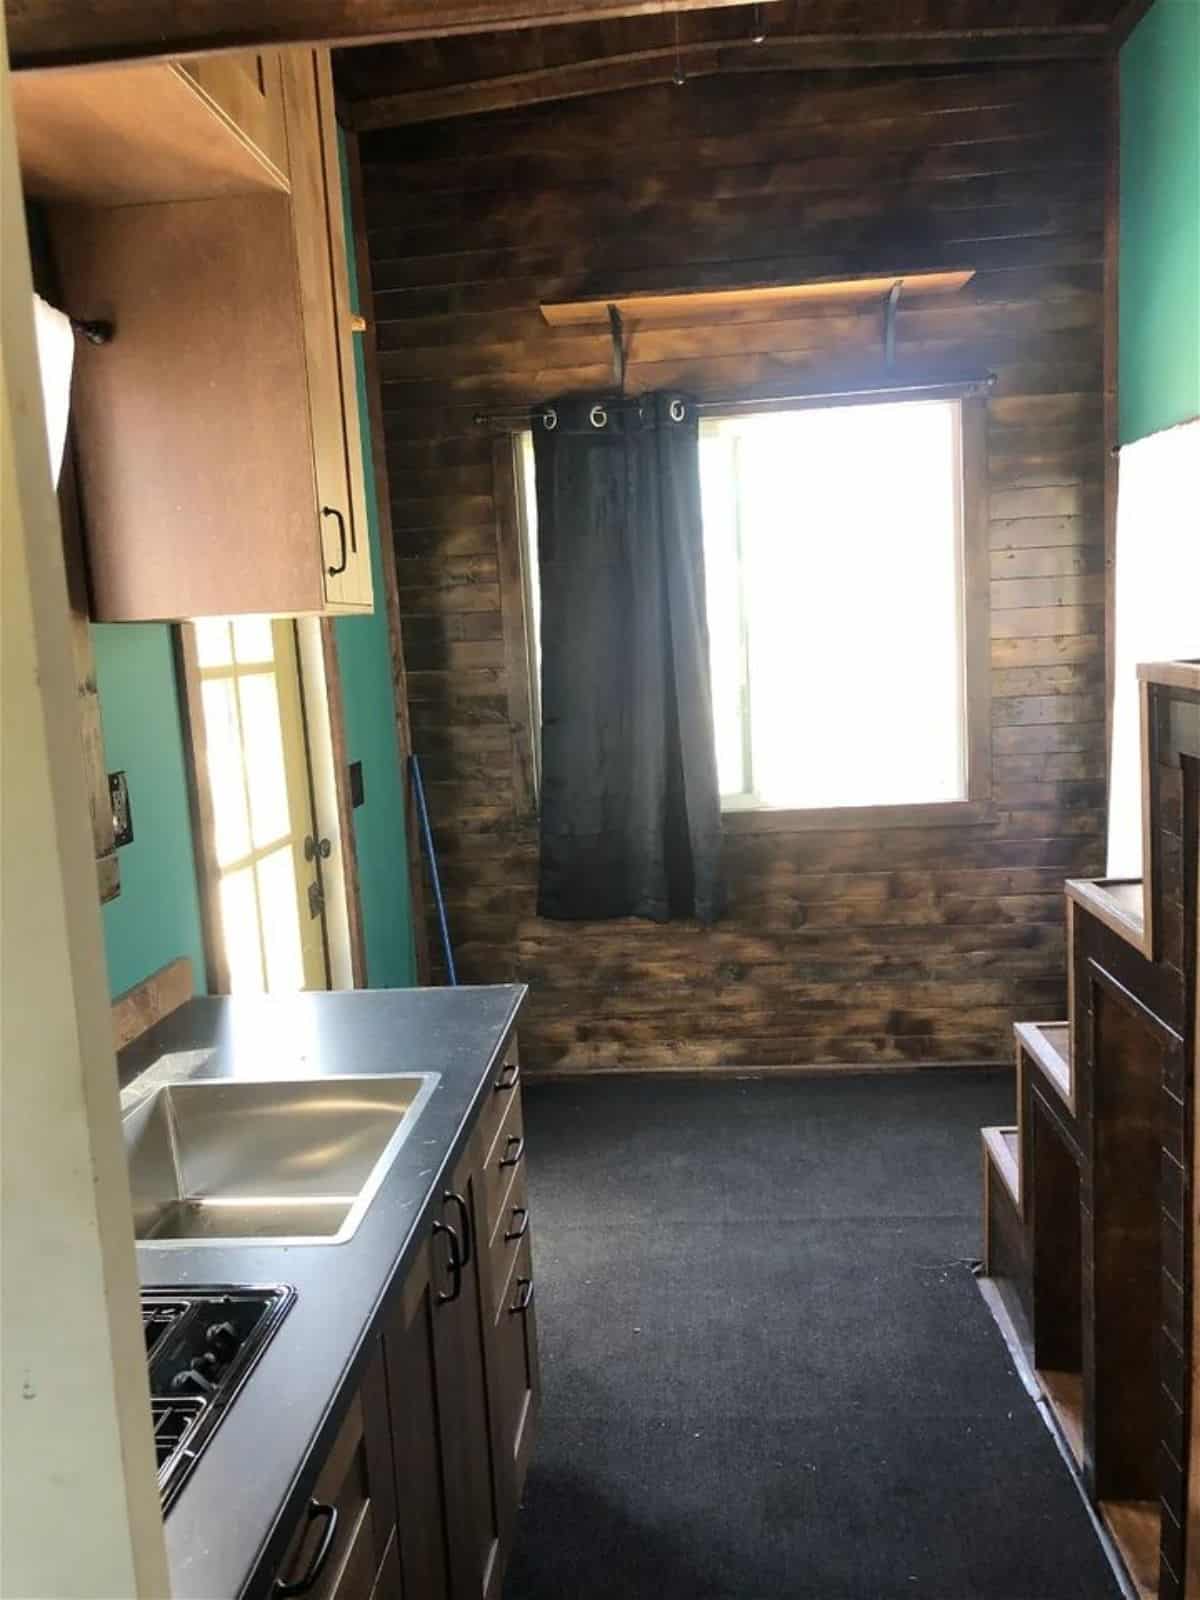 Living area of bargain tiny home